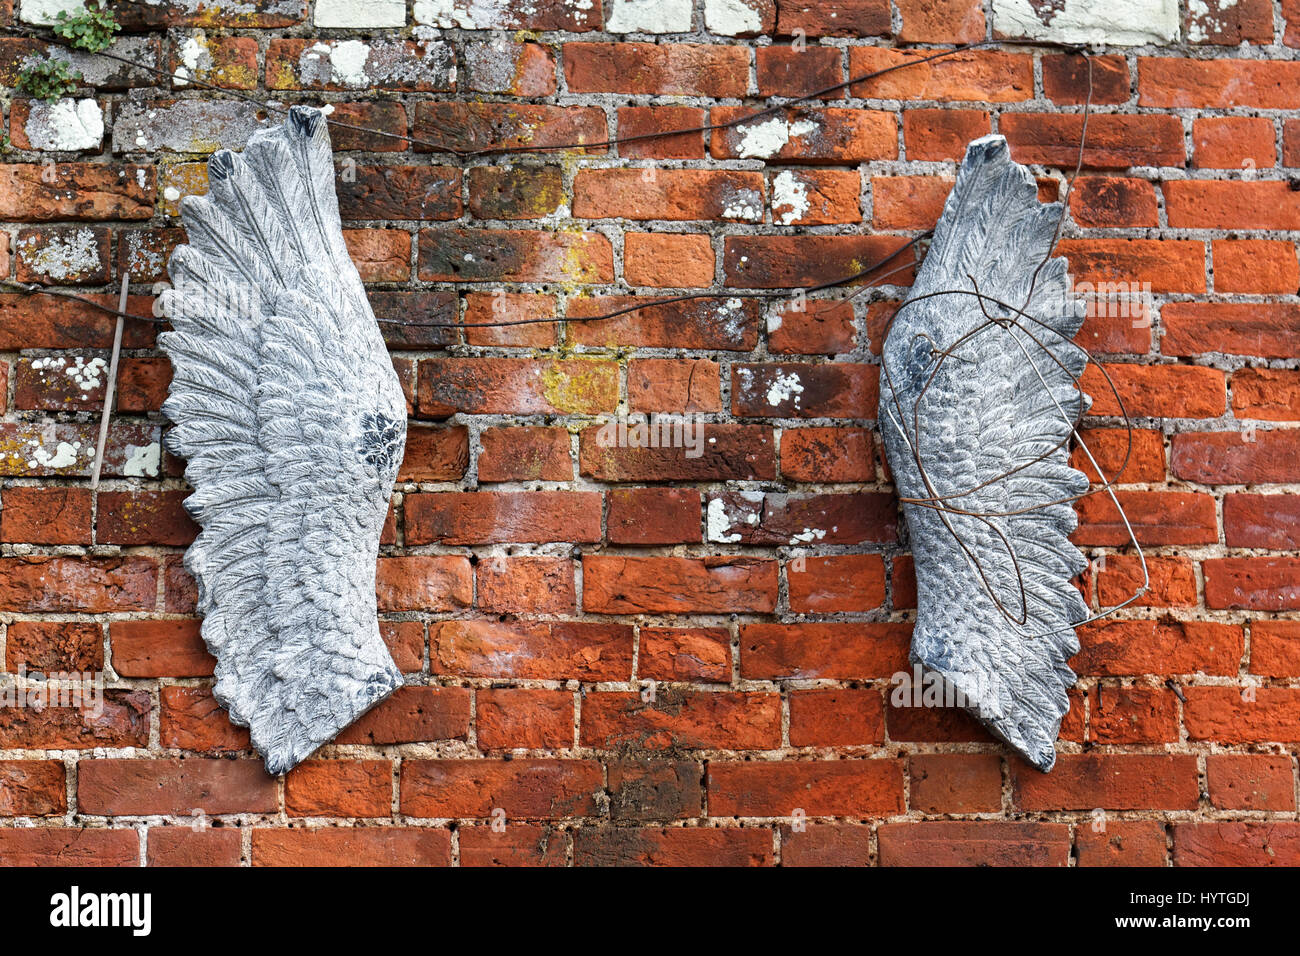 Details 100 Wall Wings Background Abzlocalmx